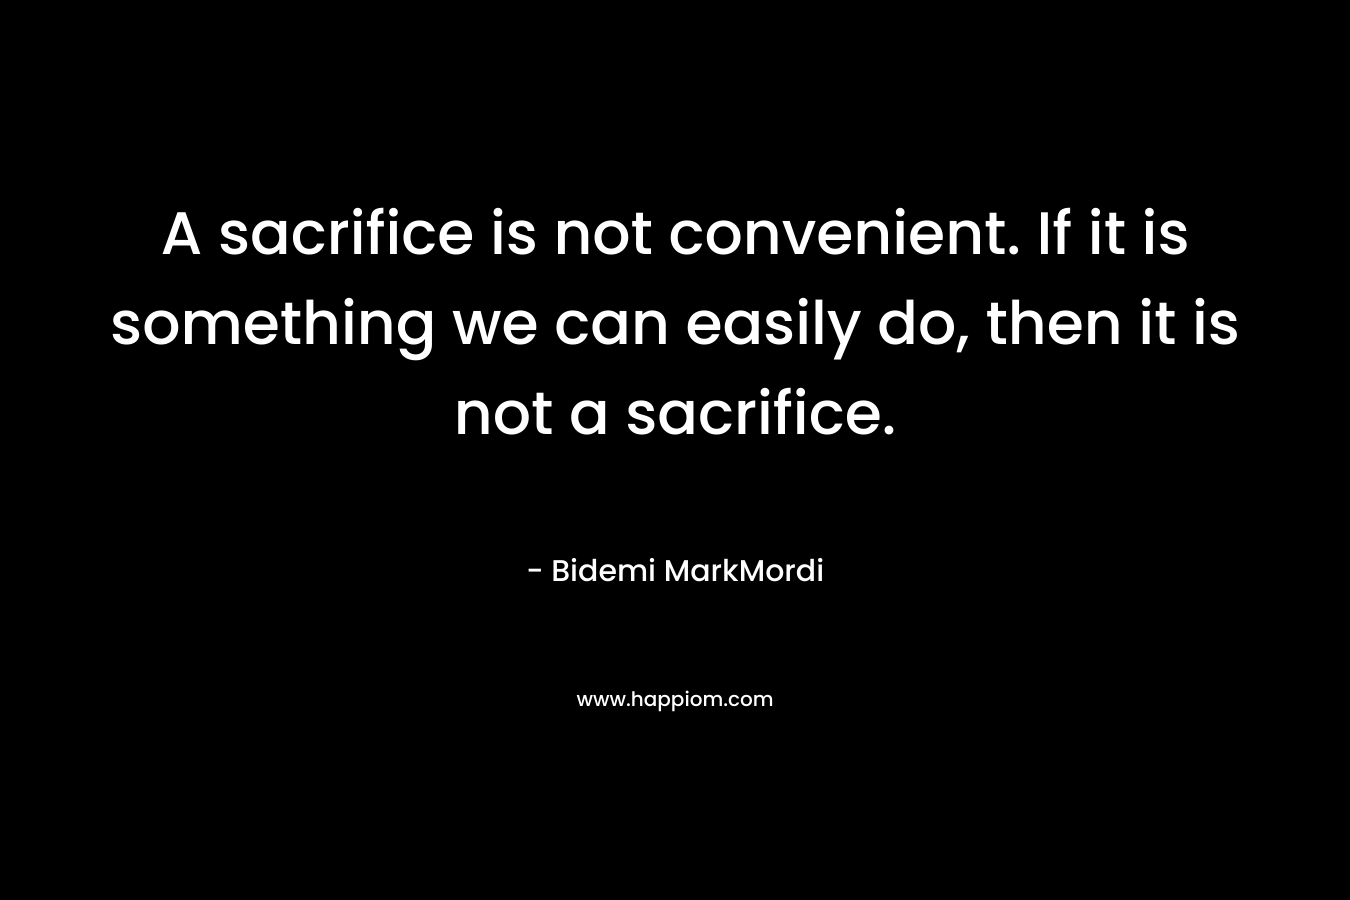 A sacrifice is not convenient. If it is something we can easily do, then it is not a sacrifice.